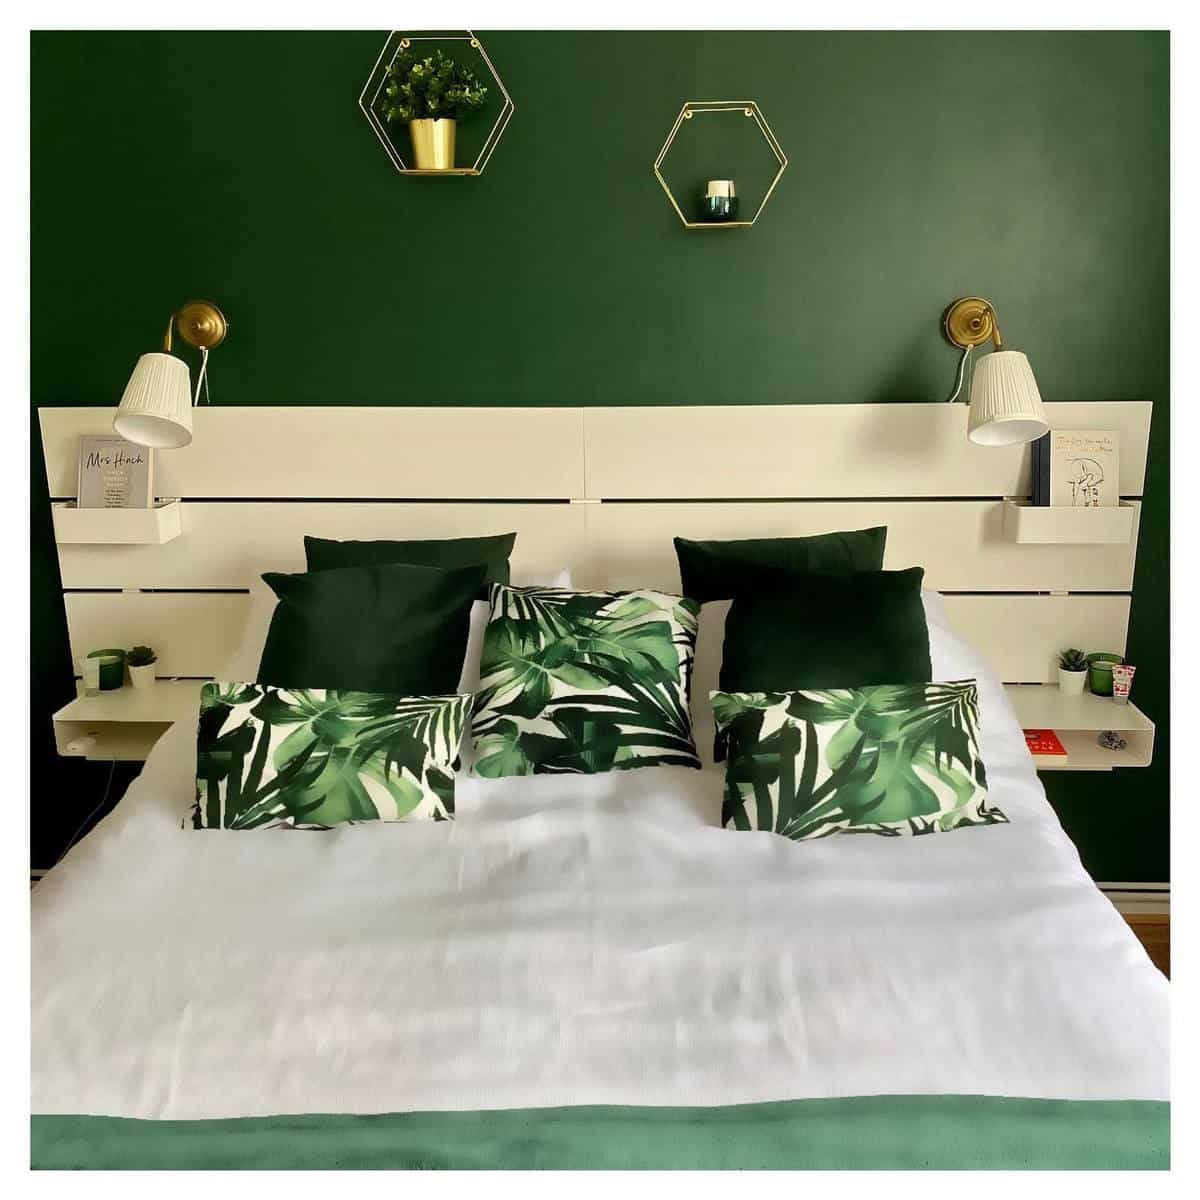 Modern bedroom with green wall, wooden panel, bed frame, wall sconces and lights